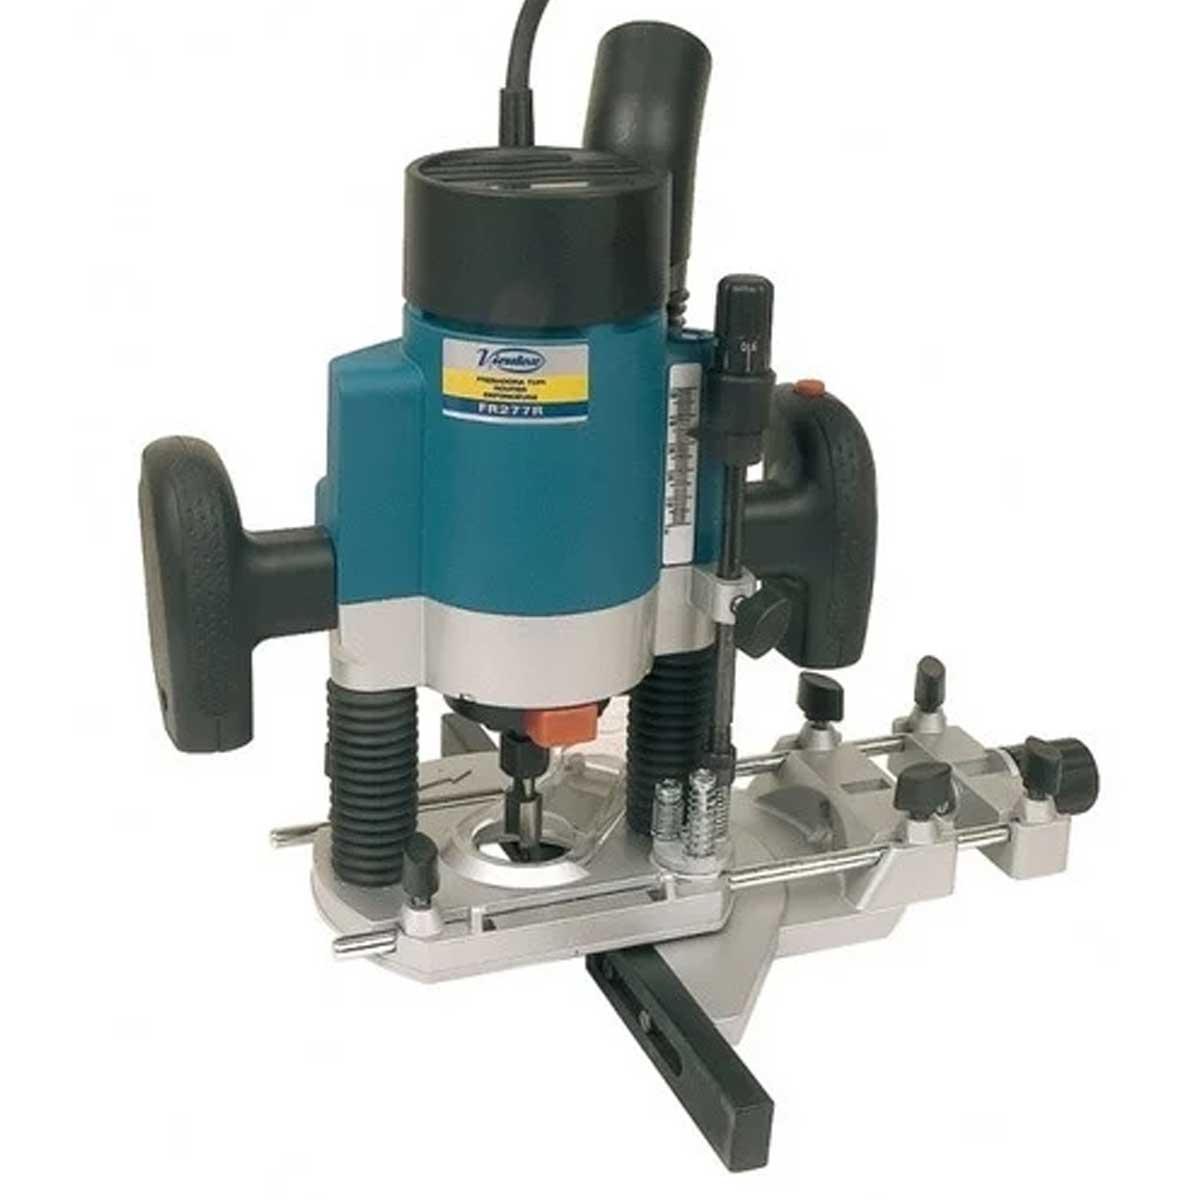 Surface Router Manufacturers, Suppliers in Indore